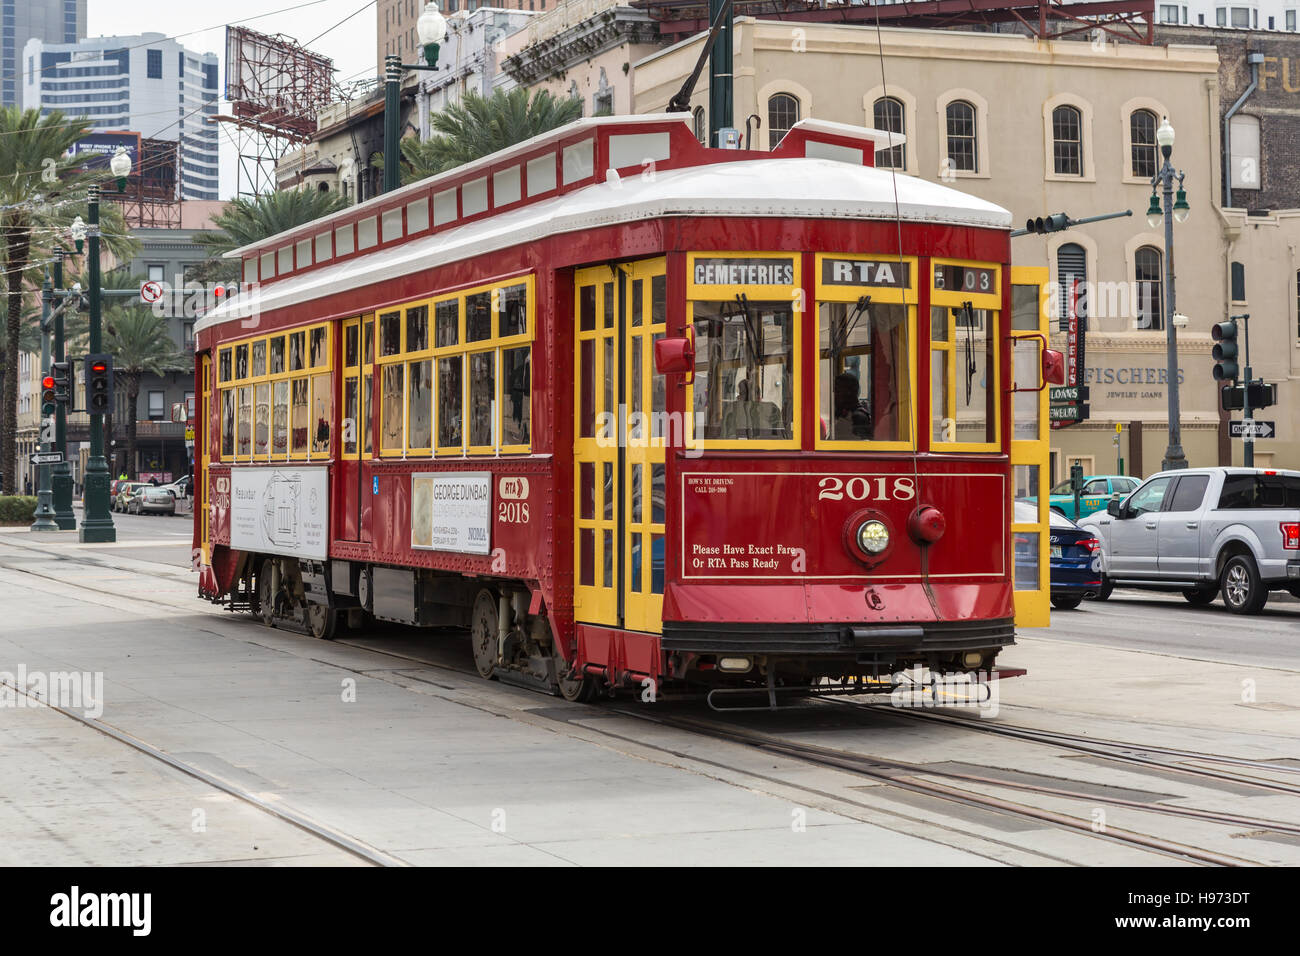 A northbound RTA Canal - Cemeteries line streetcar moves along Canal Street in New Orleans, Louisiana. Stock Photo